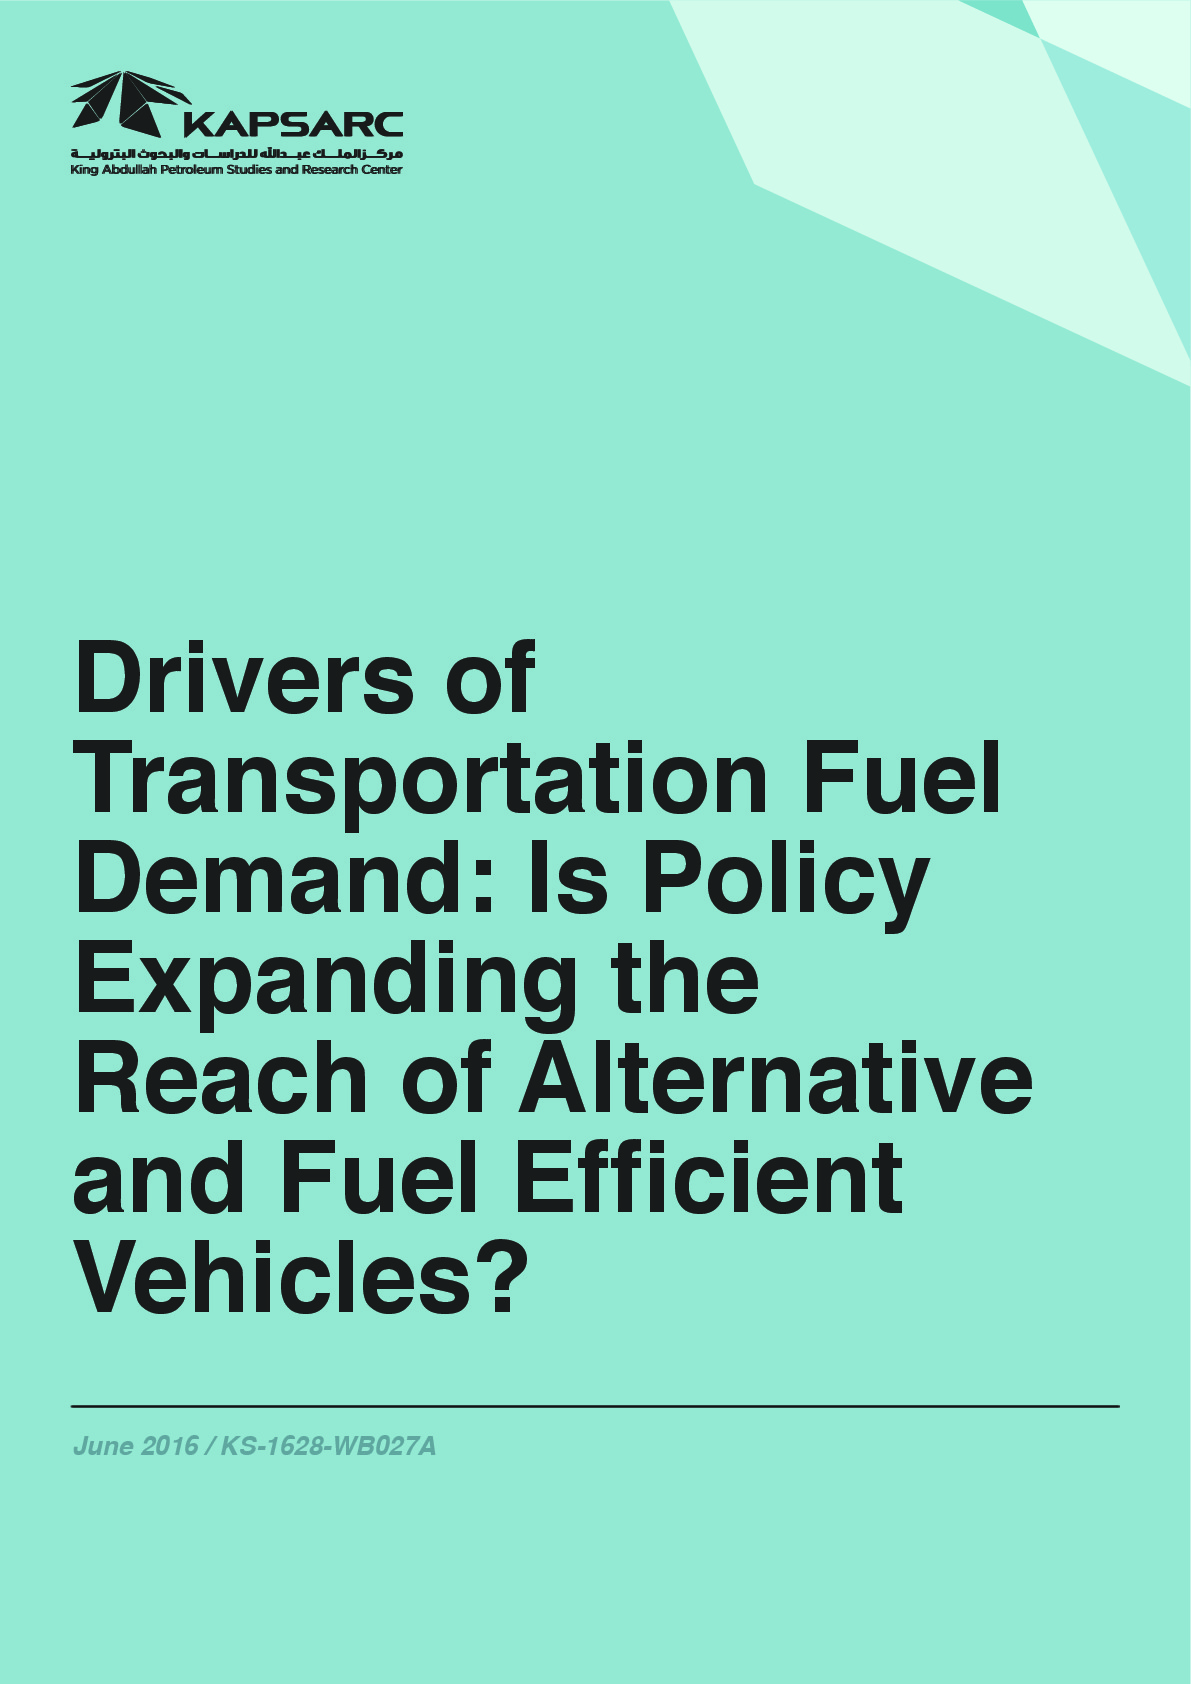 Drivers of Transportation Fuel Demand: Is Policy Expanding the Reach of Alternative and Fuel Efficient Vehicles?